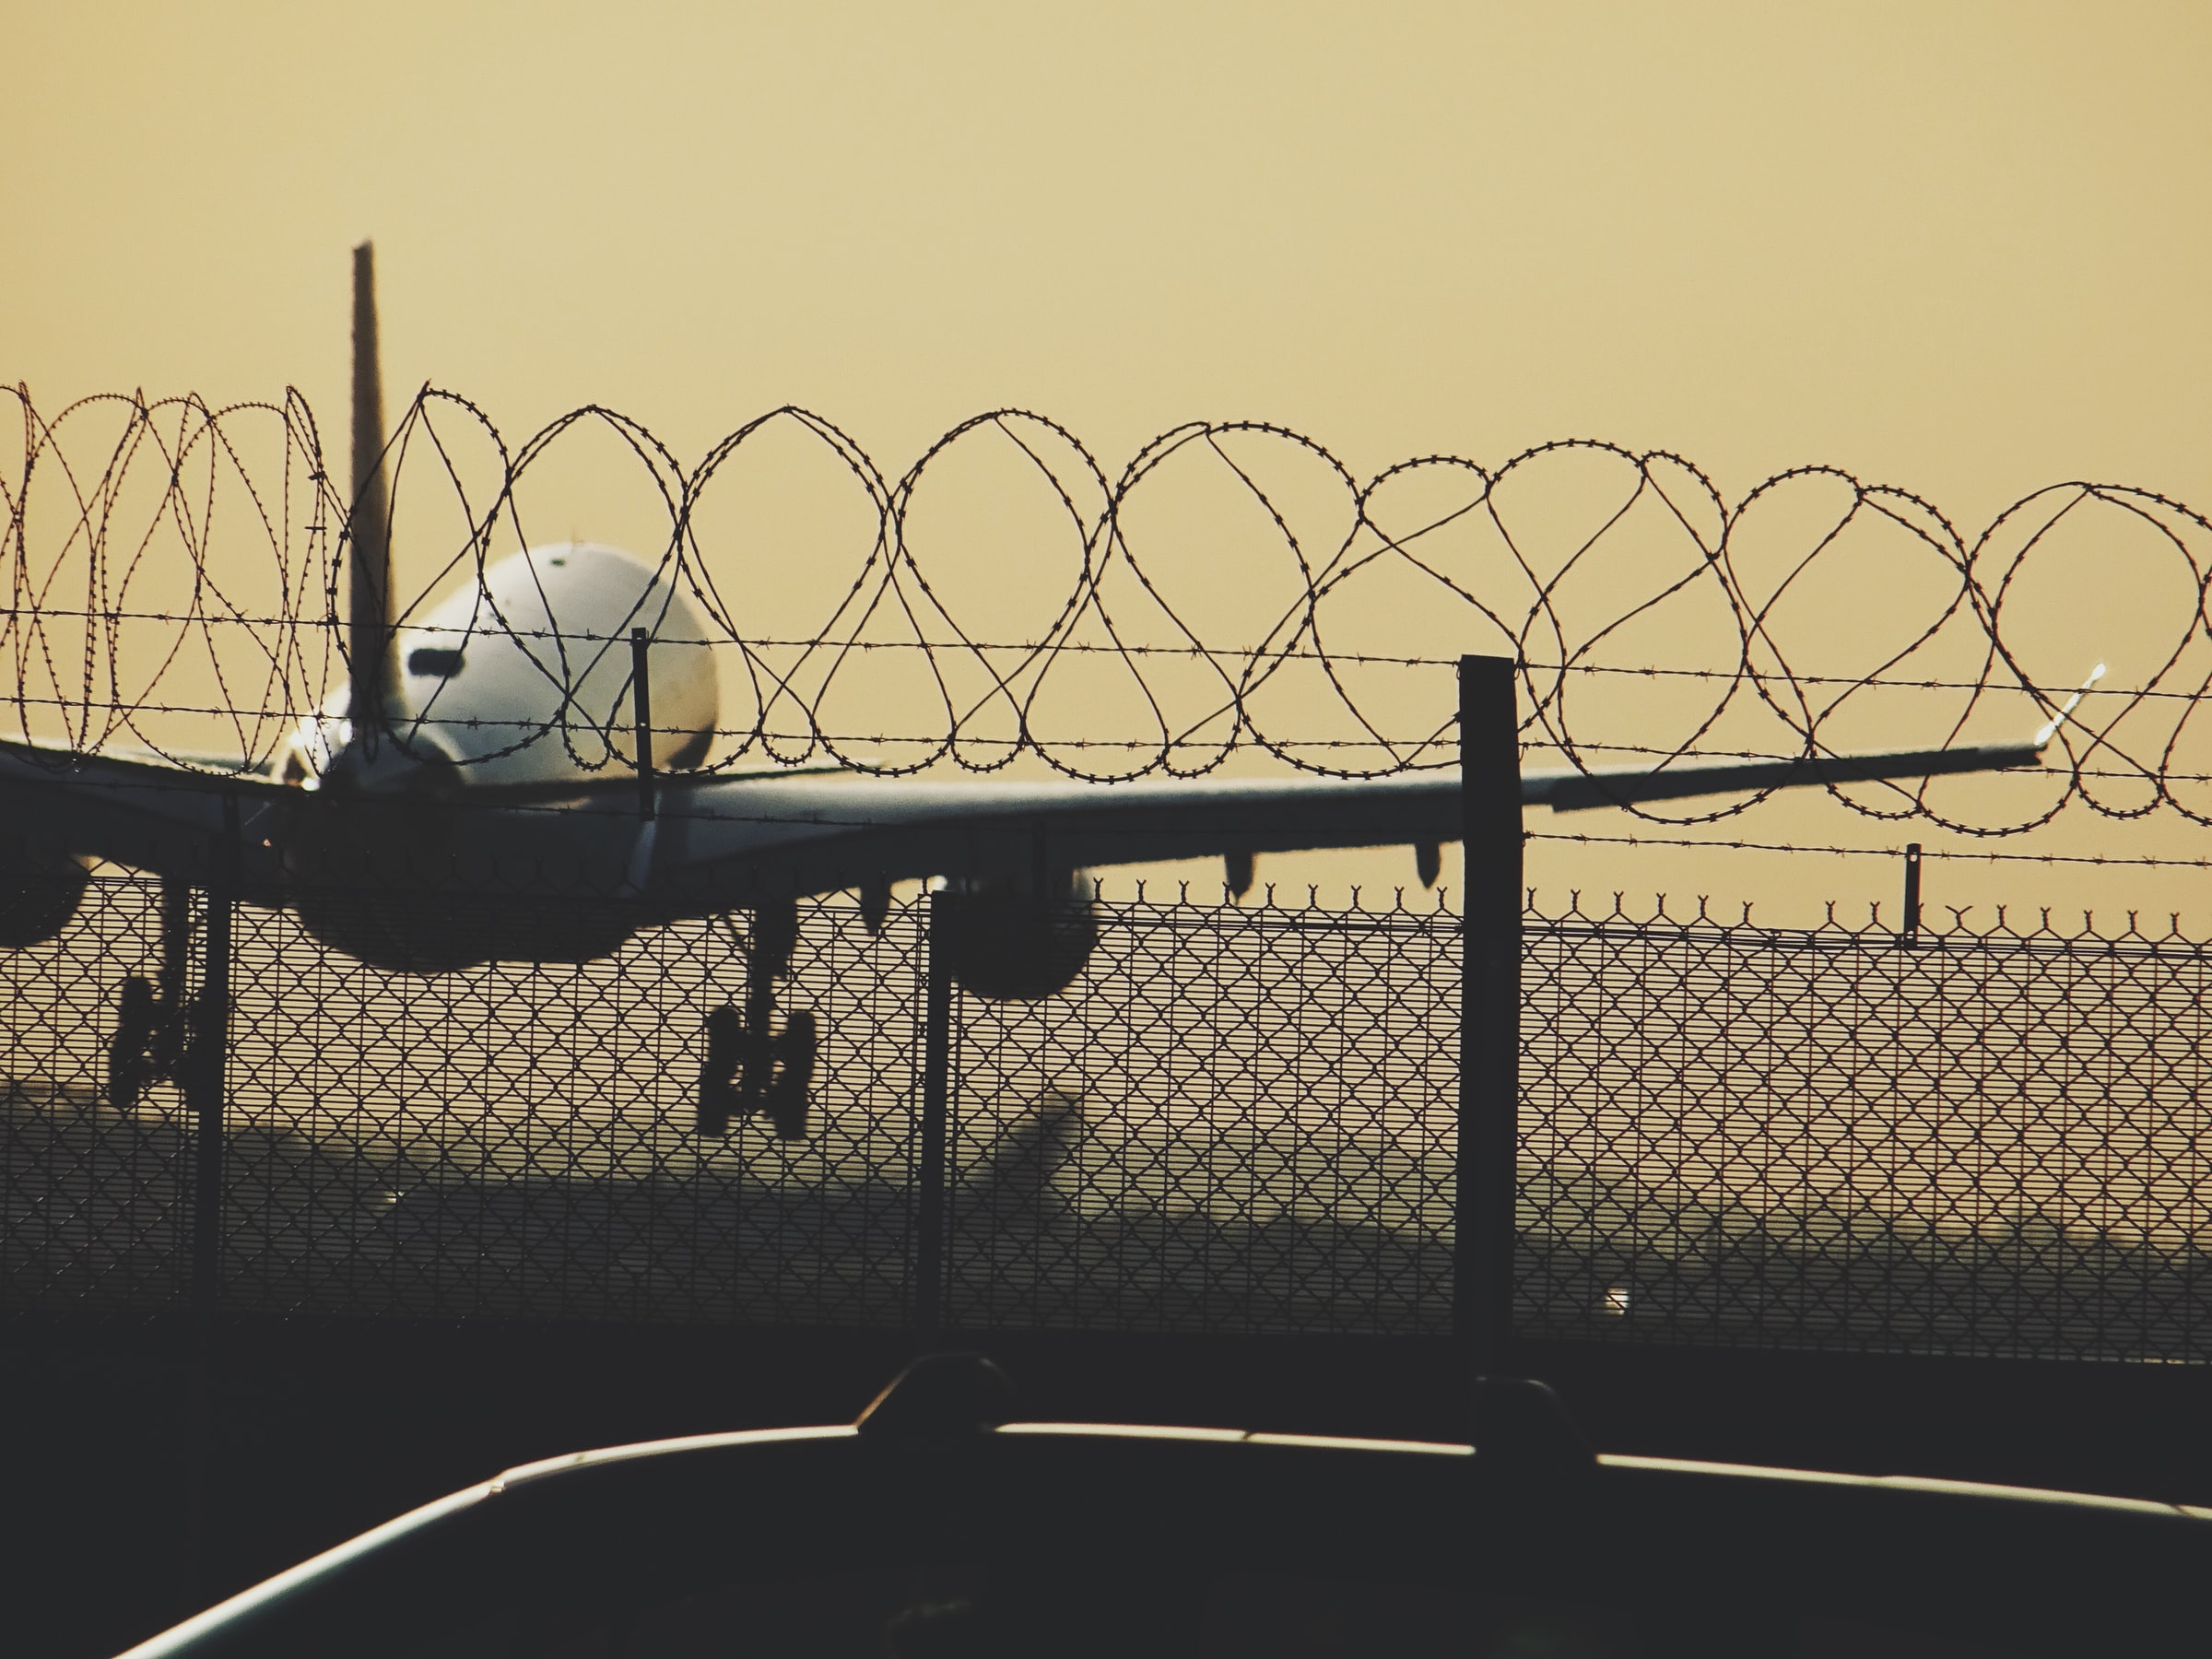 Inside Esparto 11: The charter flight ejecting asylum seekers from the UK